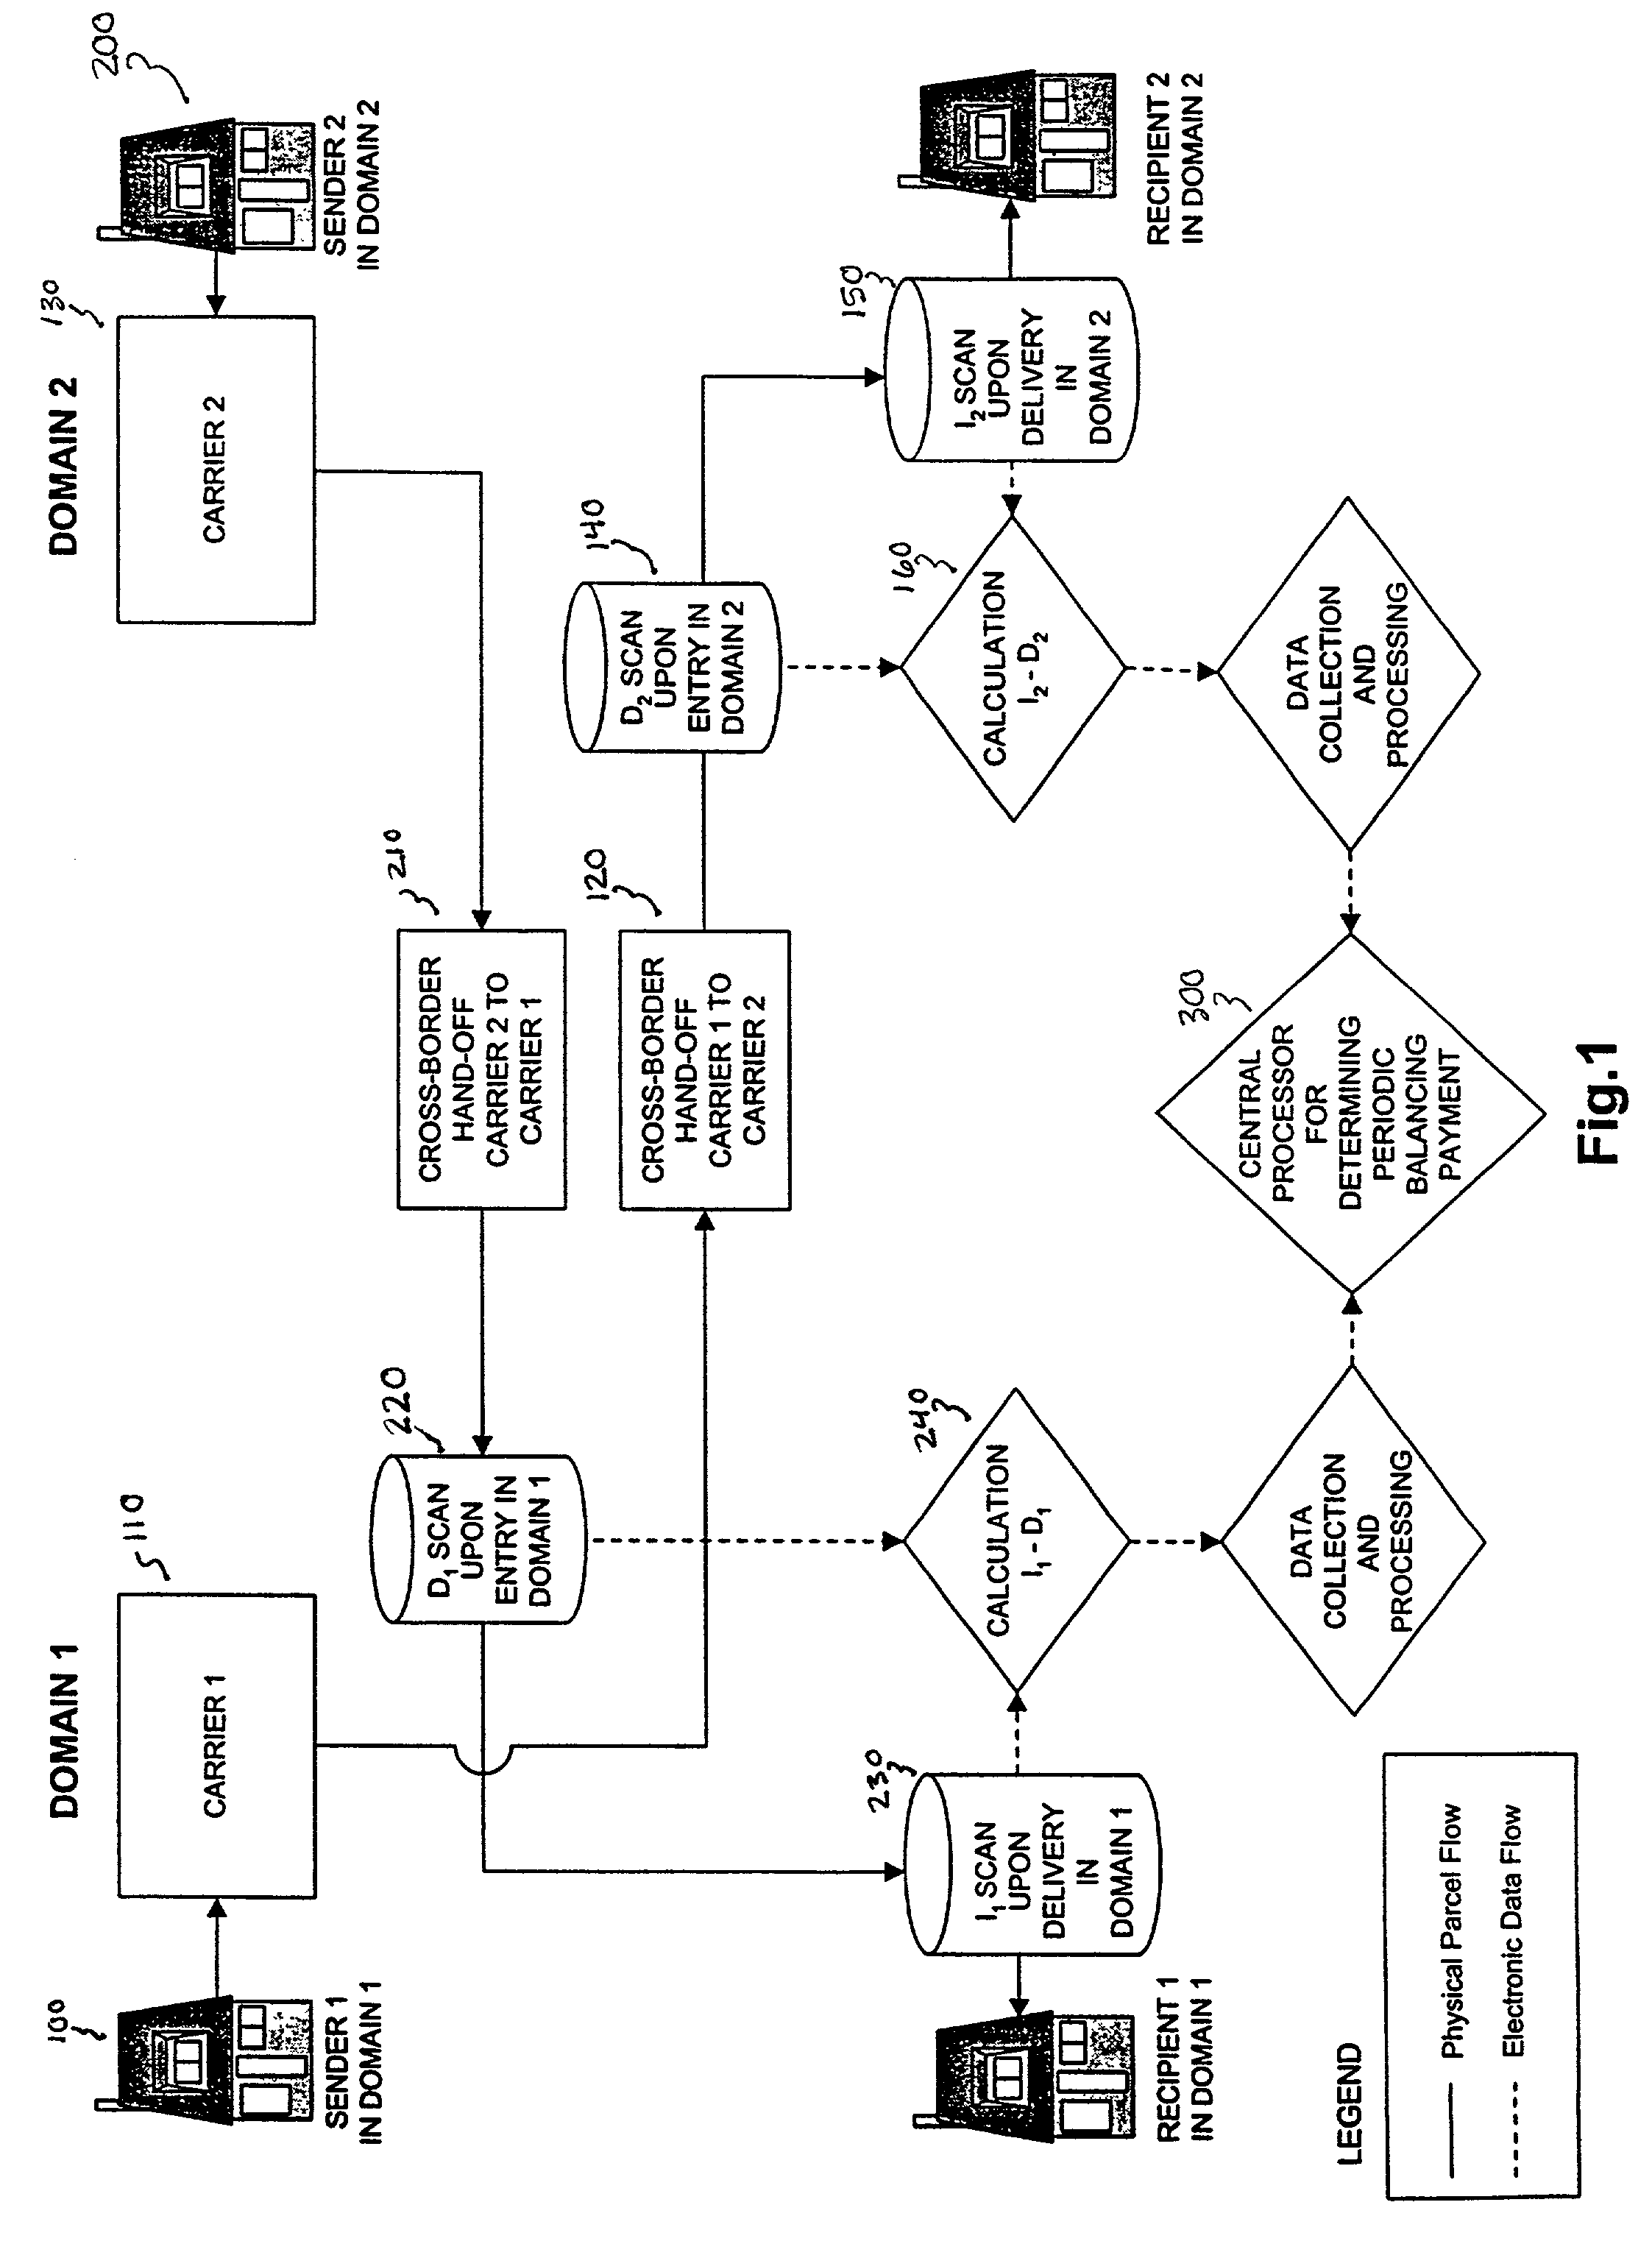 Method and system for cross-carrier parcel tracking